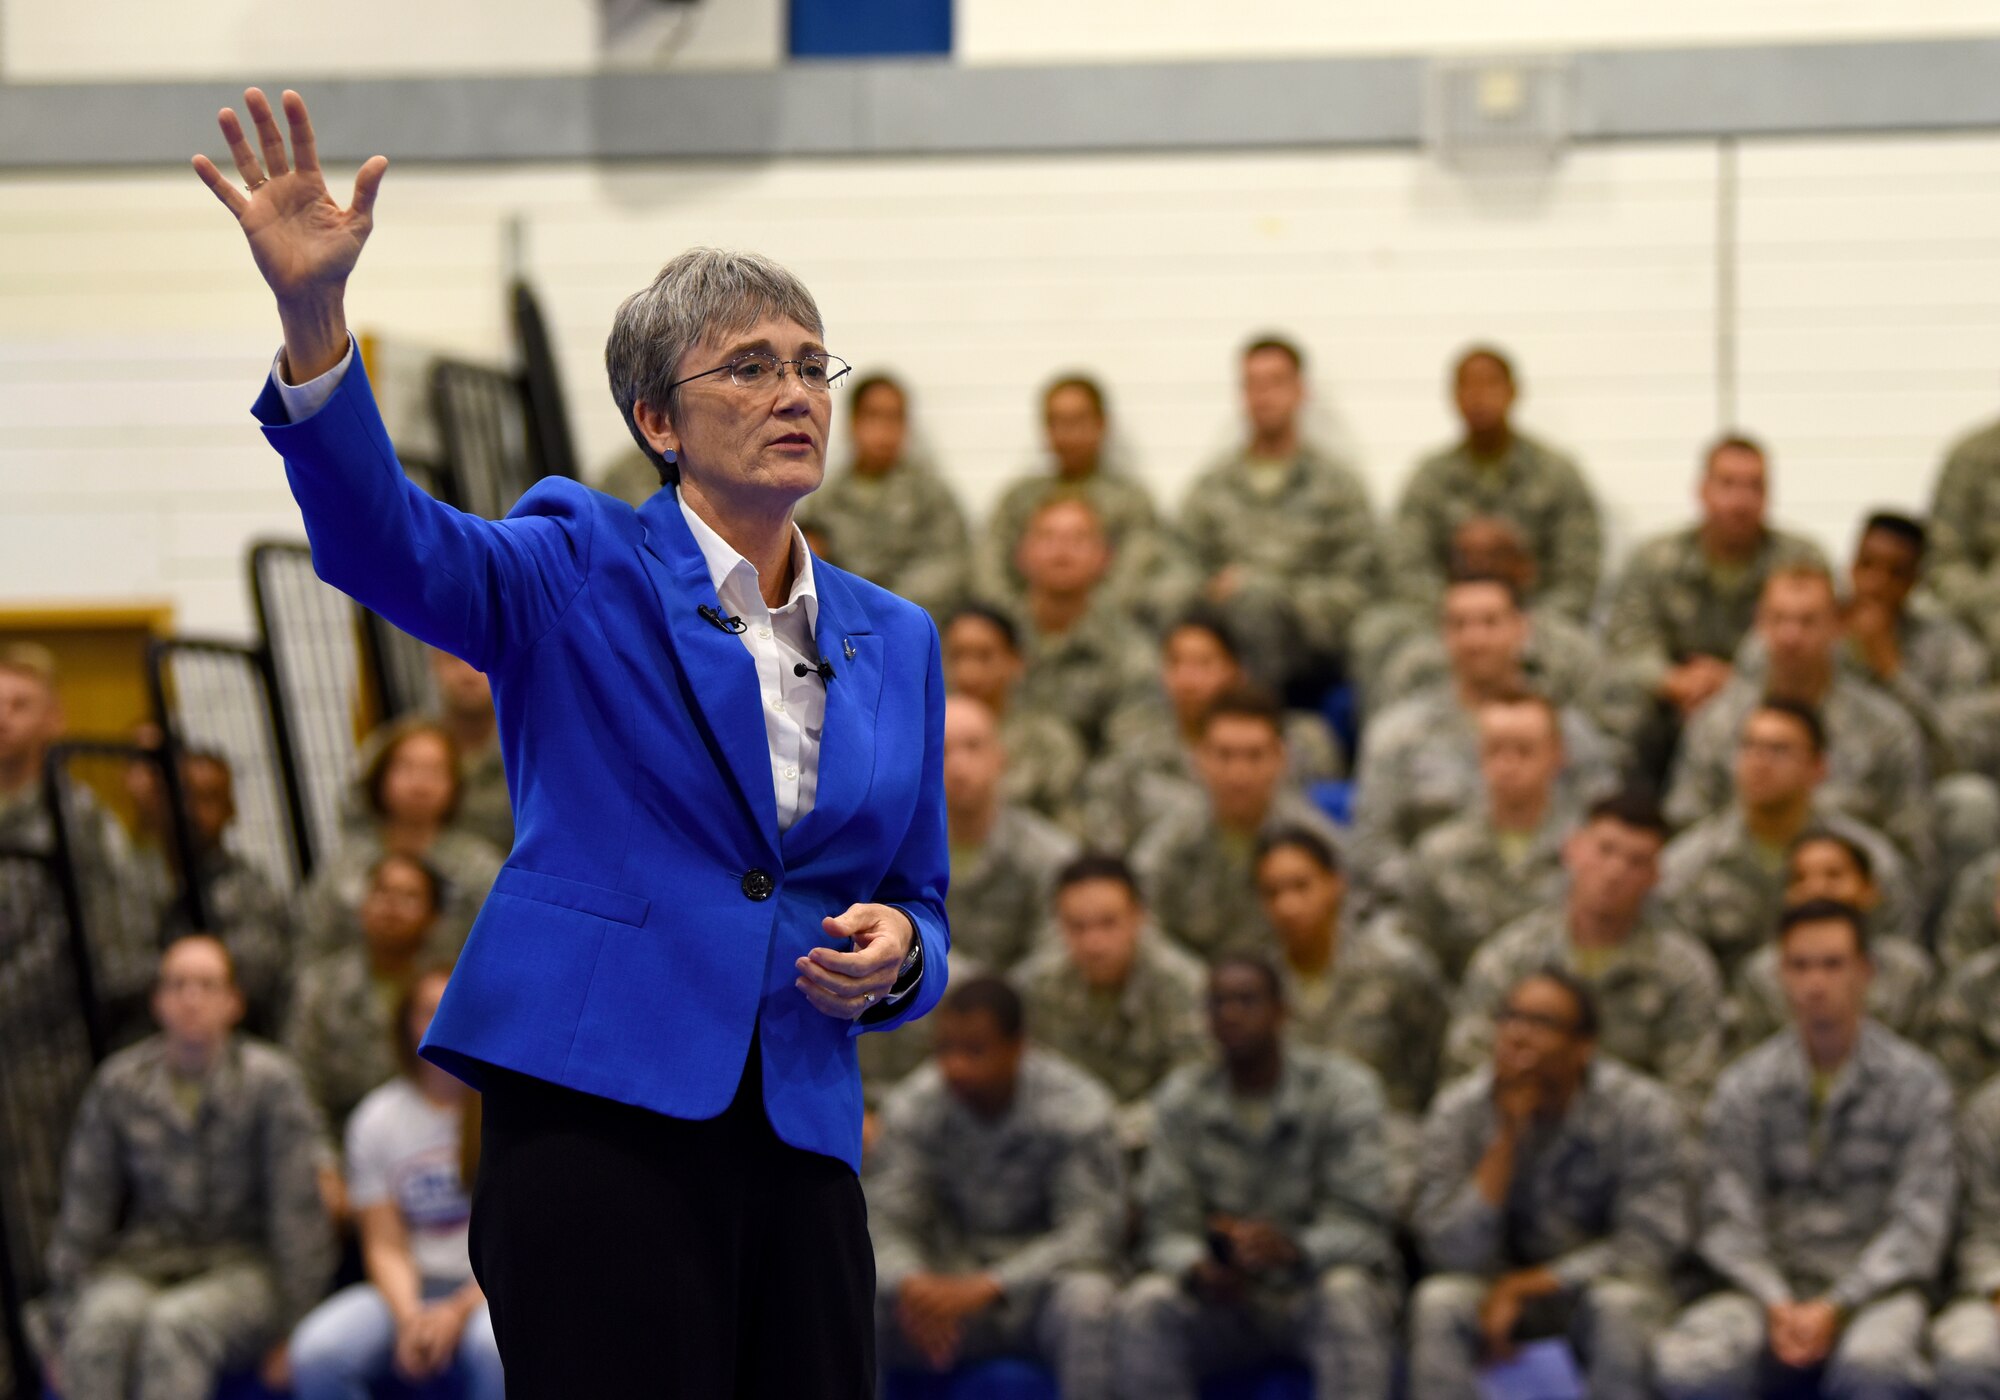 Secretary of the Air Force Heather Wilson speaks to Liberty Wing personnel during a town hall at Royal Air Force Lakenheath, England, July 11, 2018. Wilson explained how the Air Force is focusing on the fight of the future and the importance of the branch’s current five major priorities: restoring readiness, completing cost-effective modernization, driving innovation, developing exceptional leaders, and strengthening U.S. Alliances and partnerships. (U.S. Air Force photo by Staff Sgt. Alex Fox Echols III)